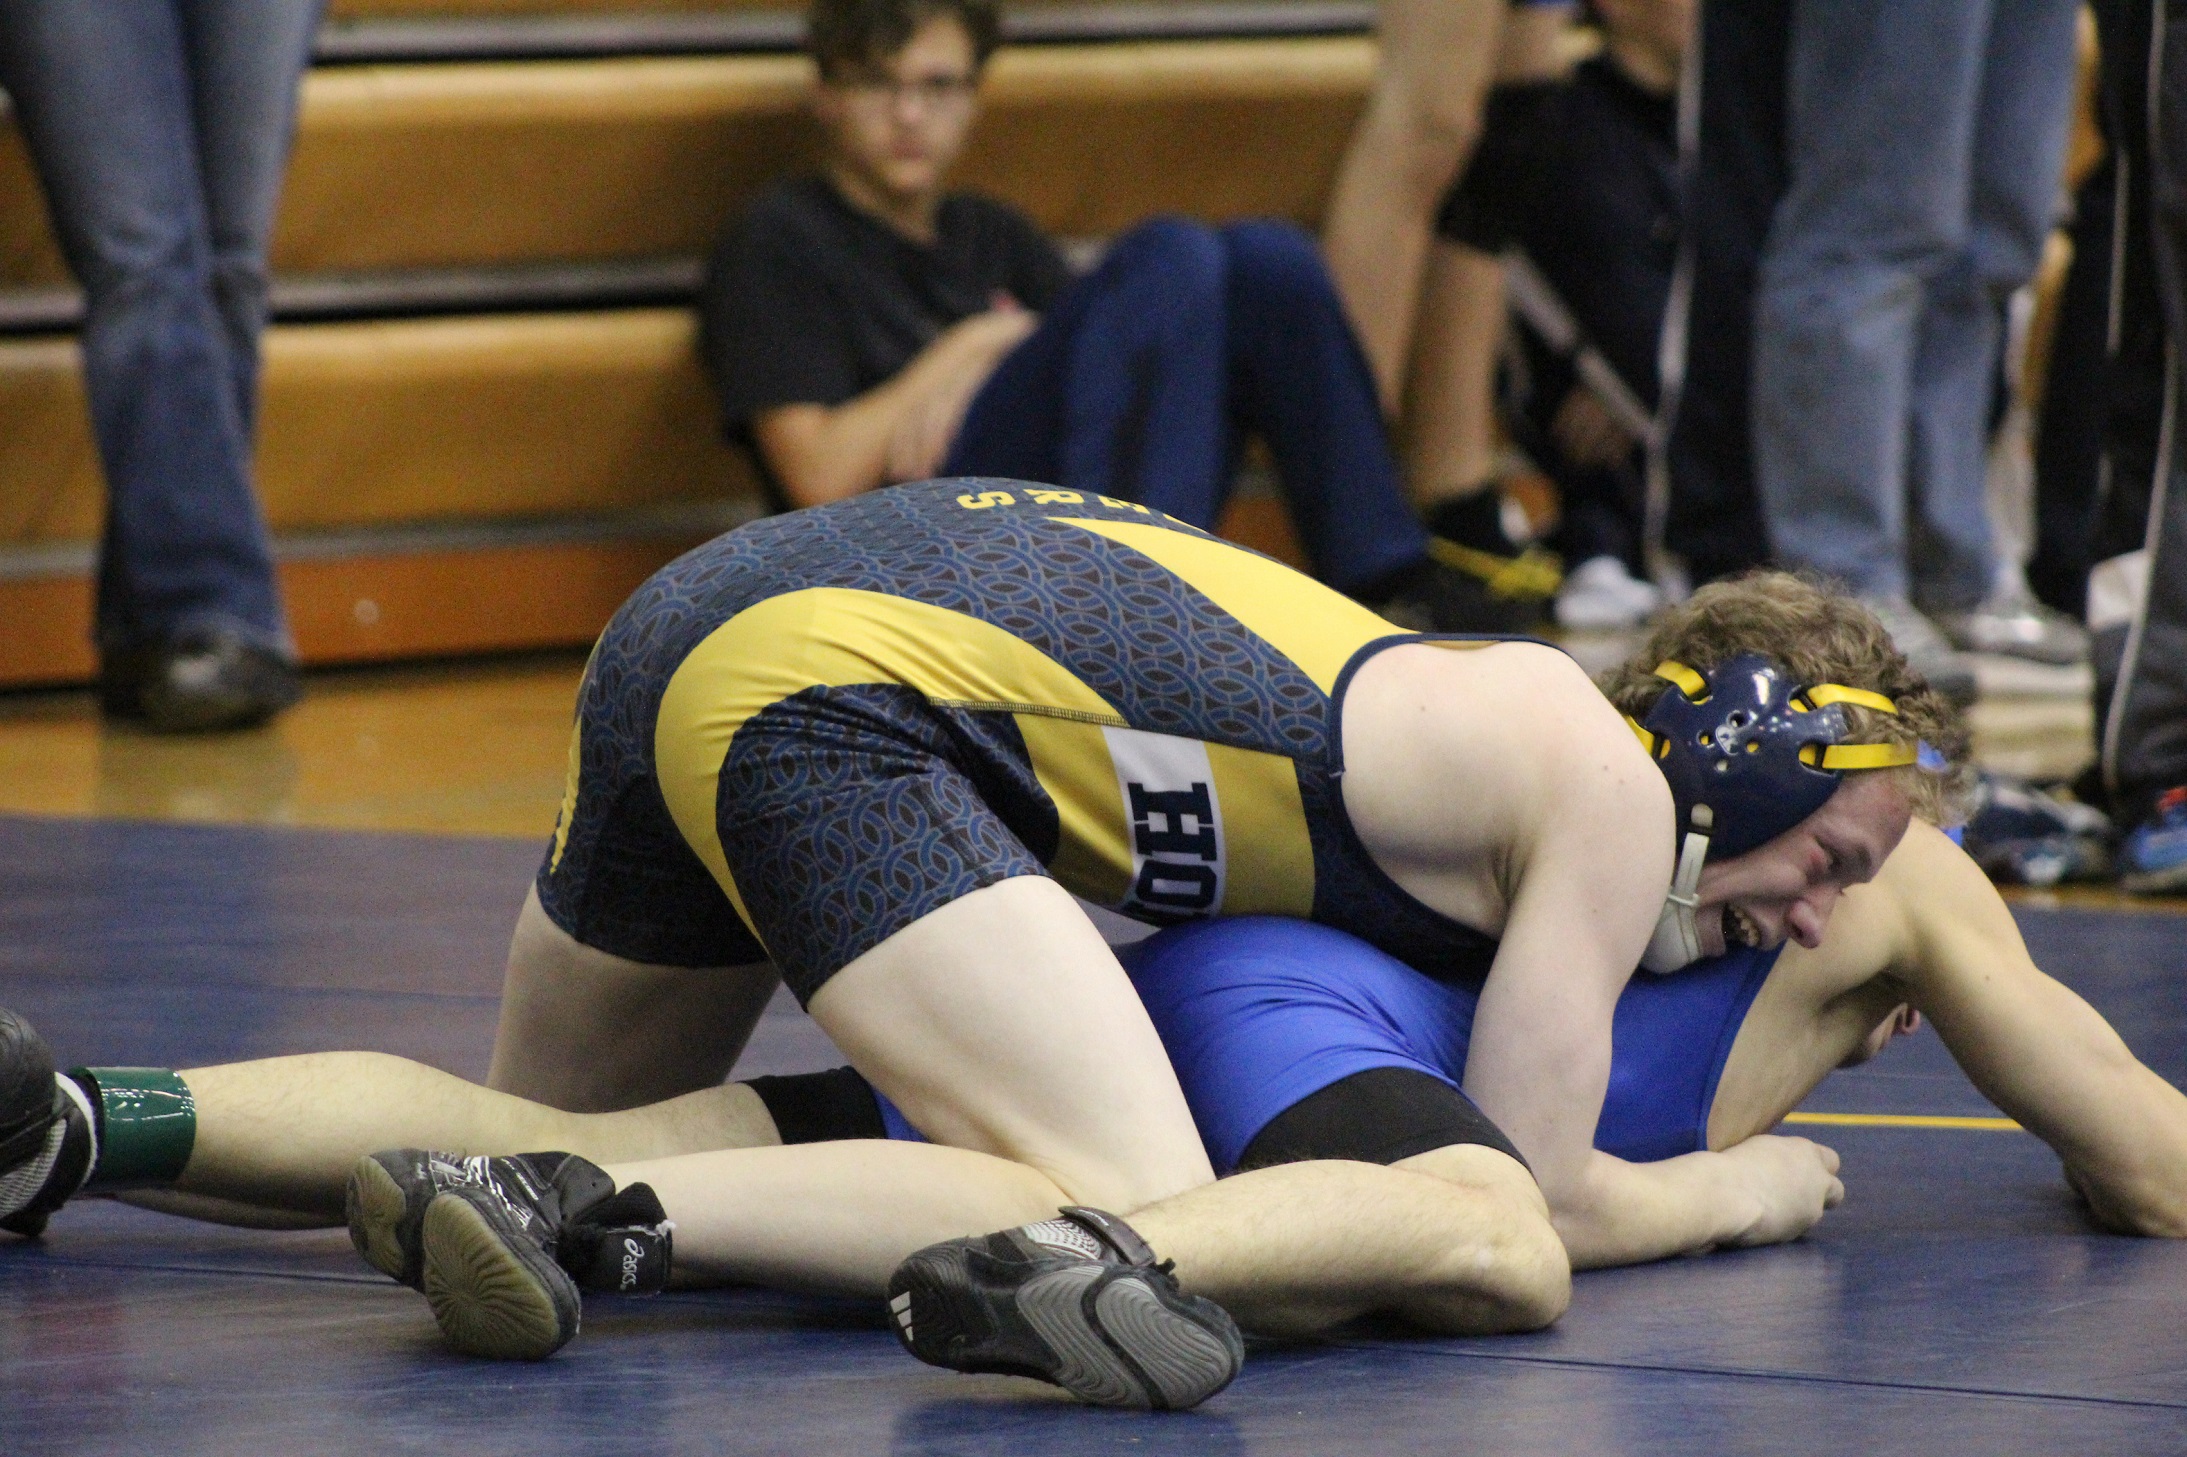 Moses Hayes works to pin down his opponent in a match at Homer High School on Saturday, Oct. 22.-Photo by Anna Frost, Homer News